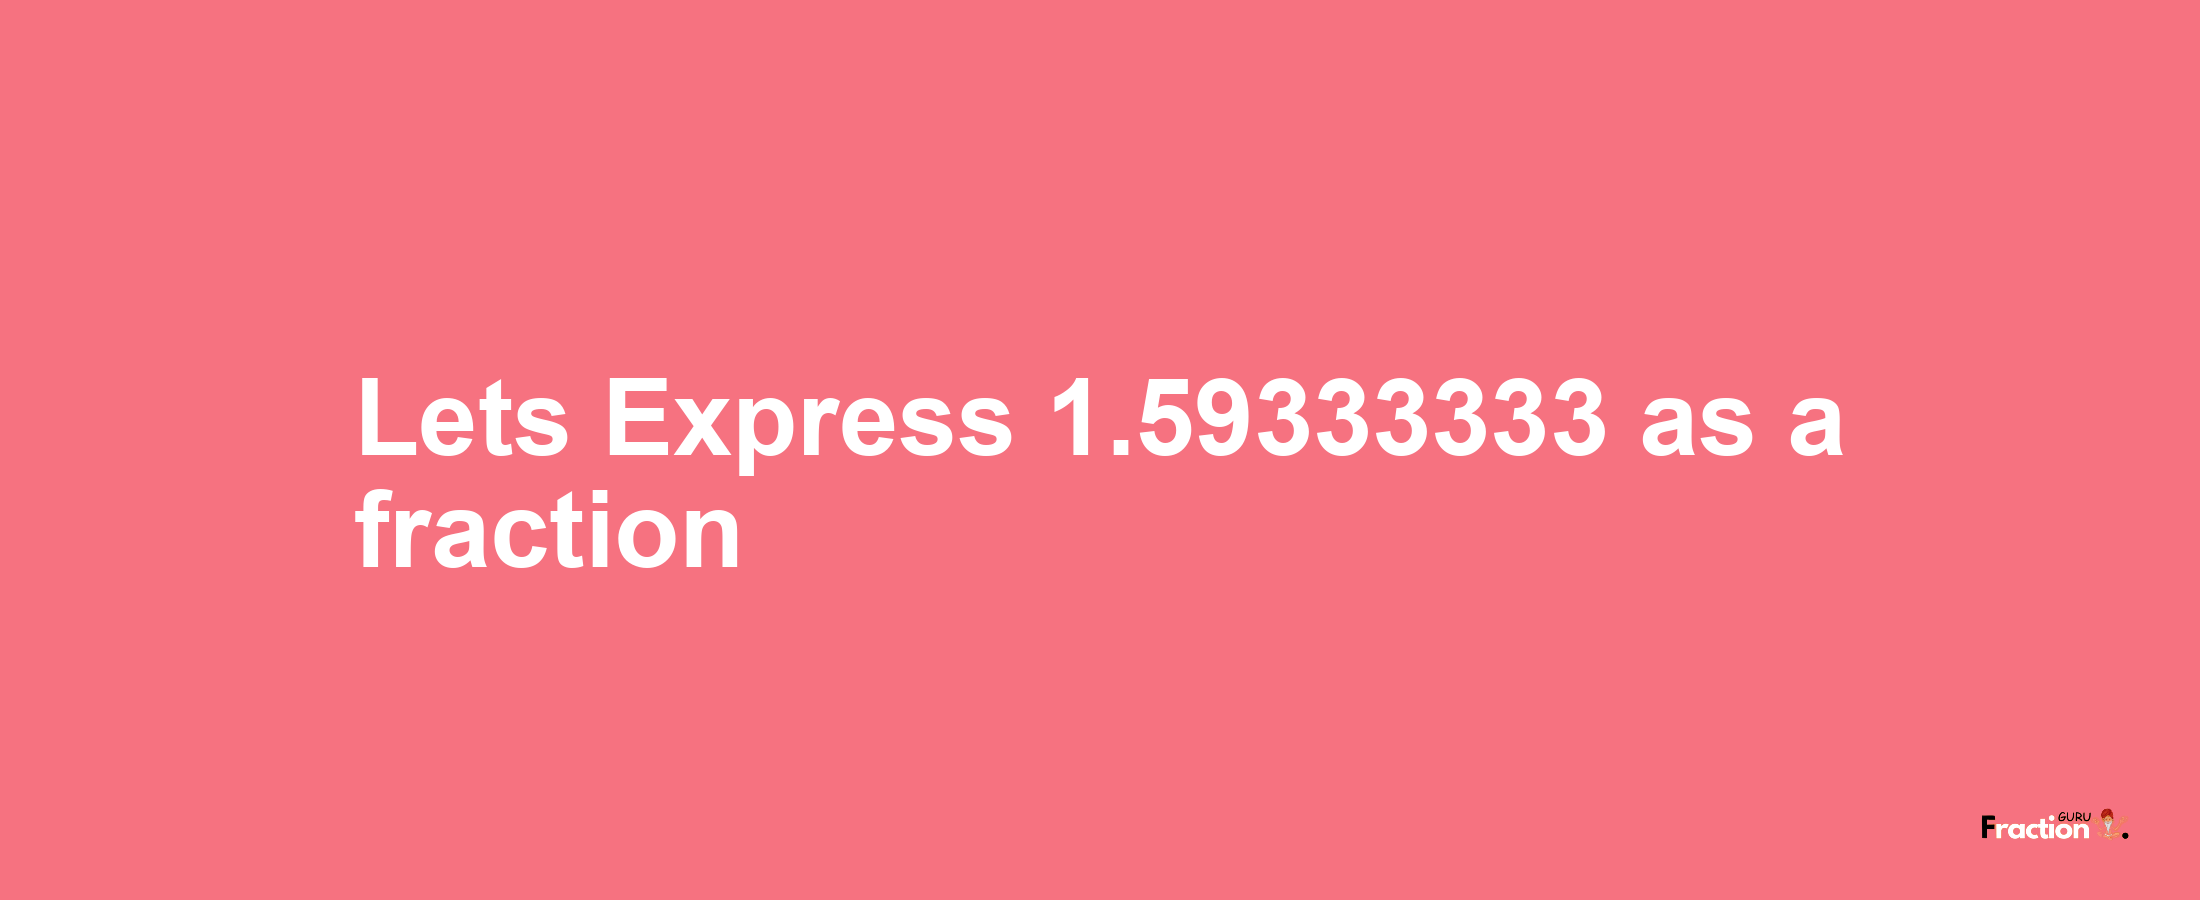 Lets Express 1.59333333 as afraction